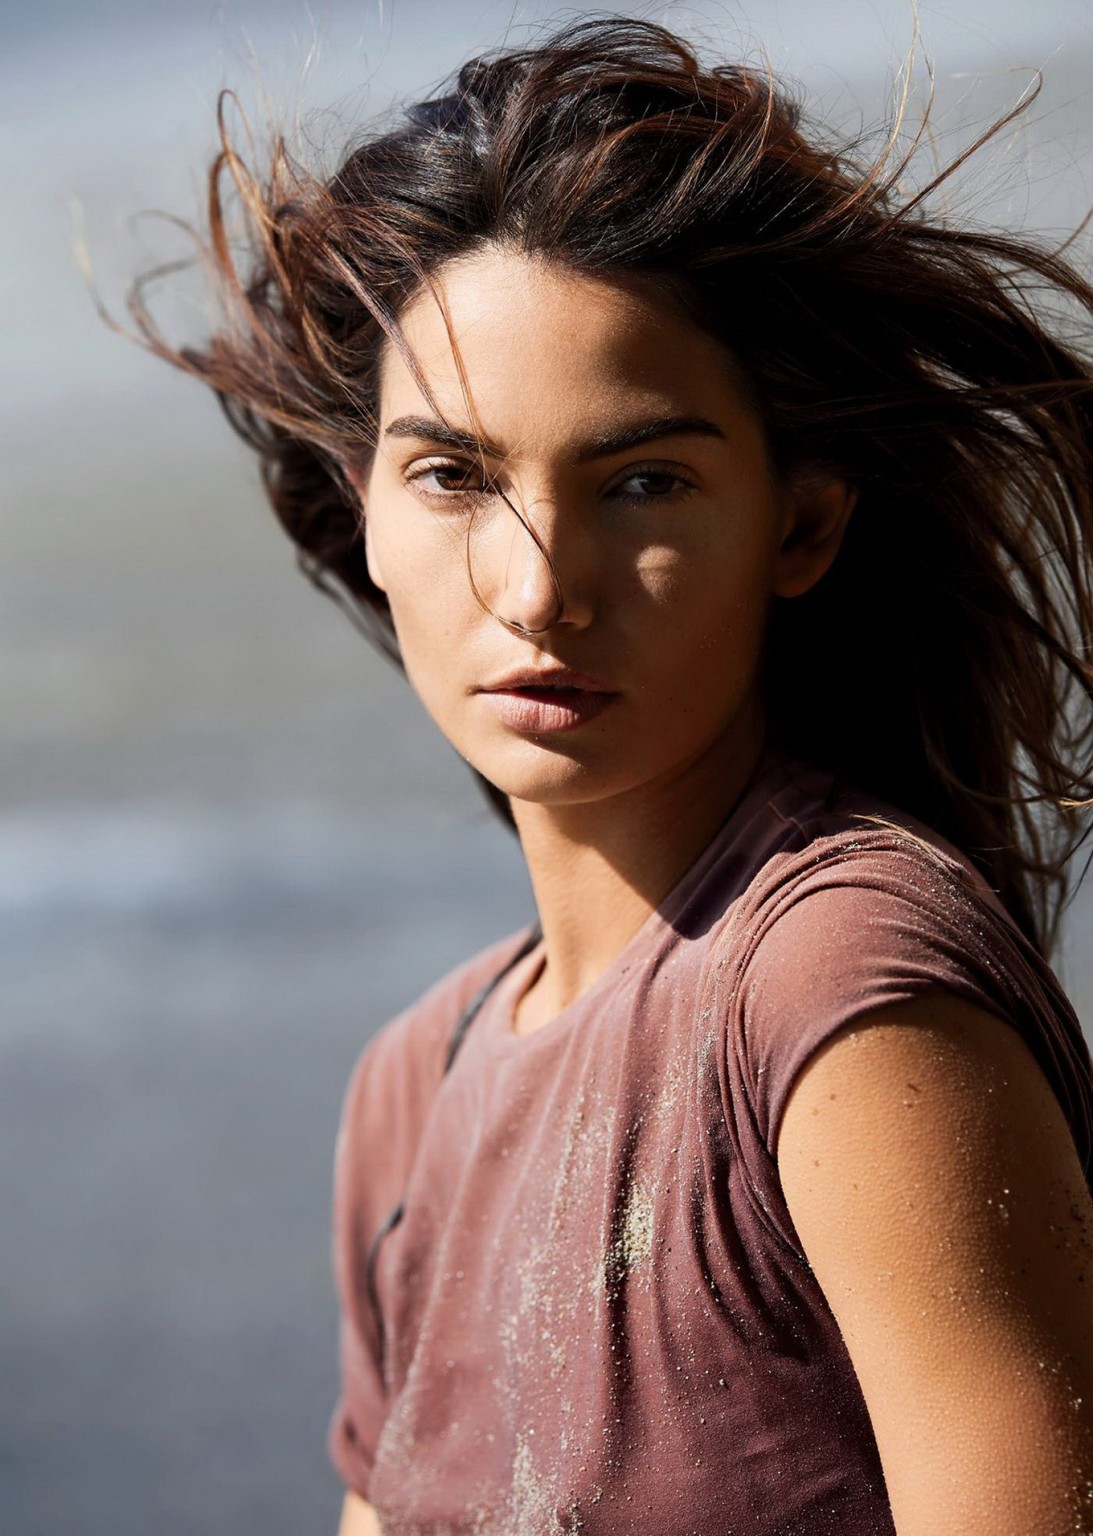 Lily Aldridge topless but hiding at the beach during a photoshot by Gilles Bensi #75168088